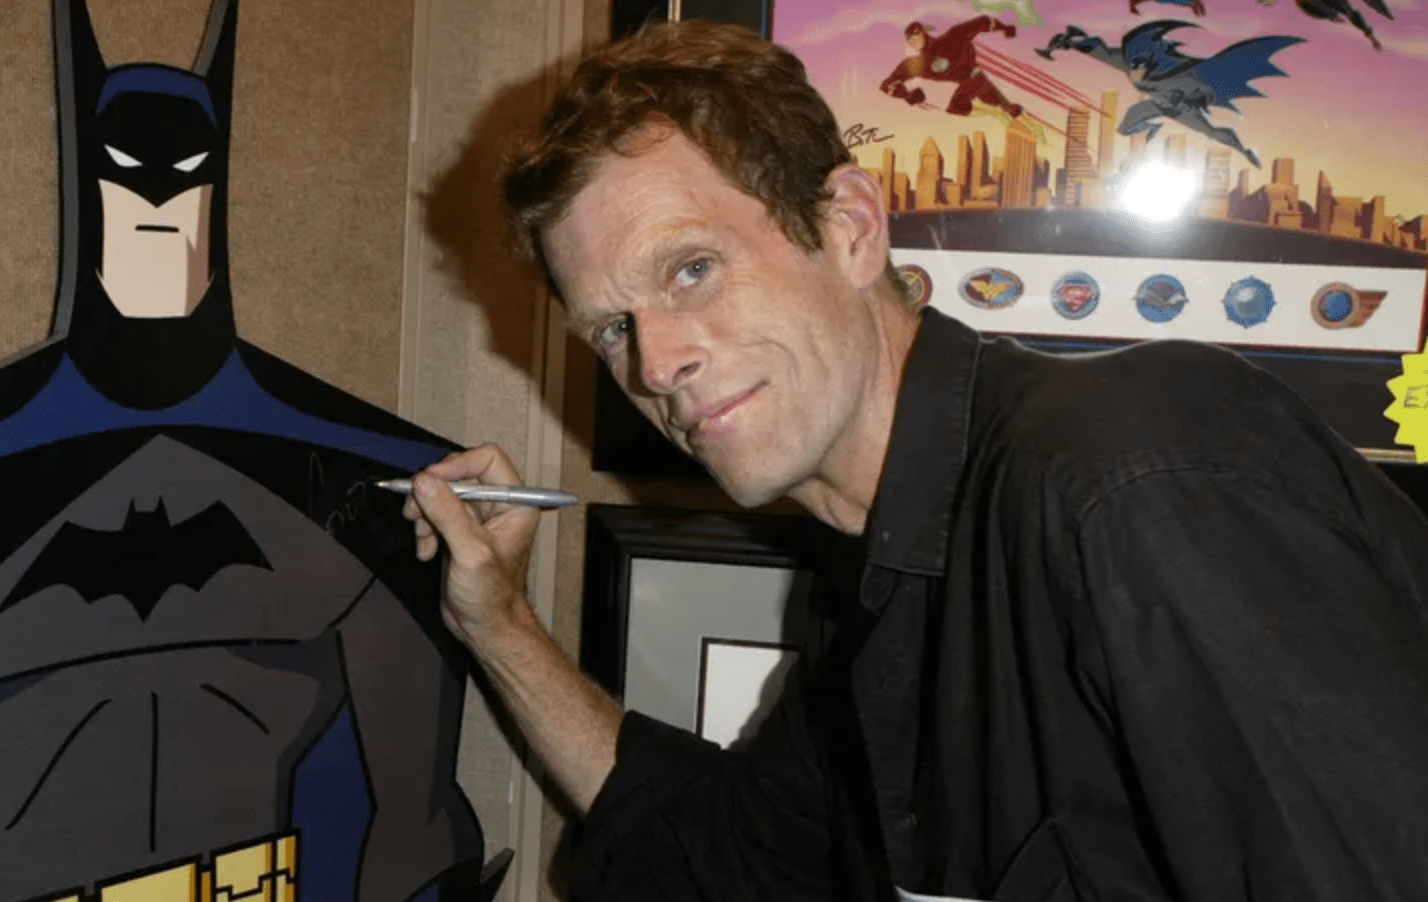 Birth chart of Kevin Conroy - Astrology horoscope